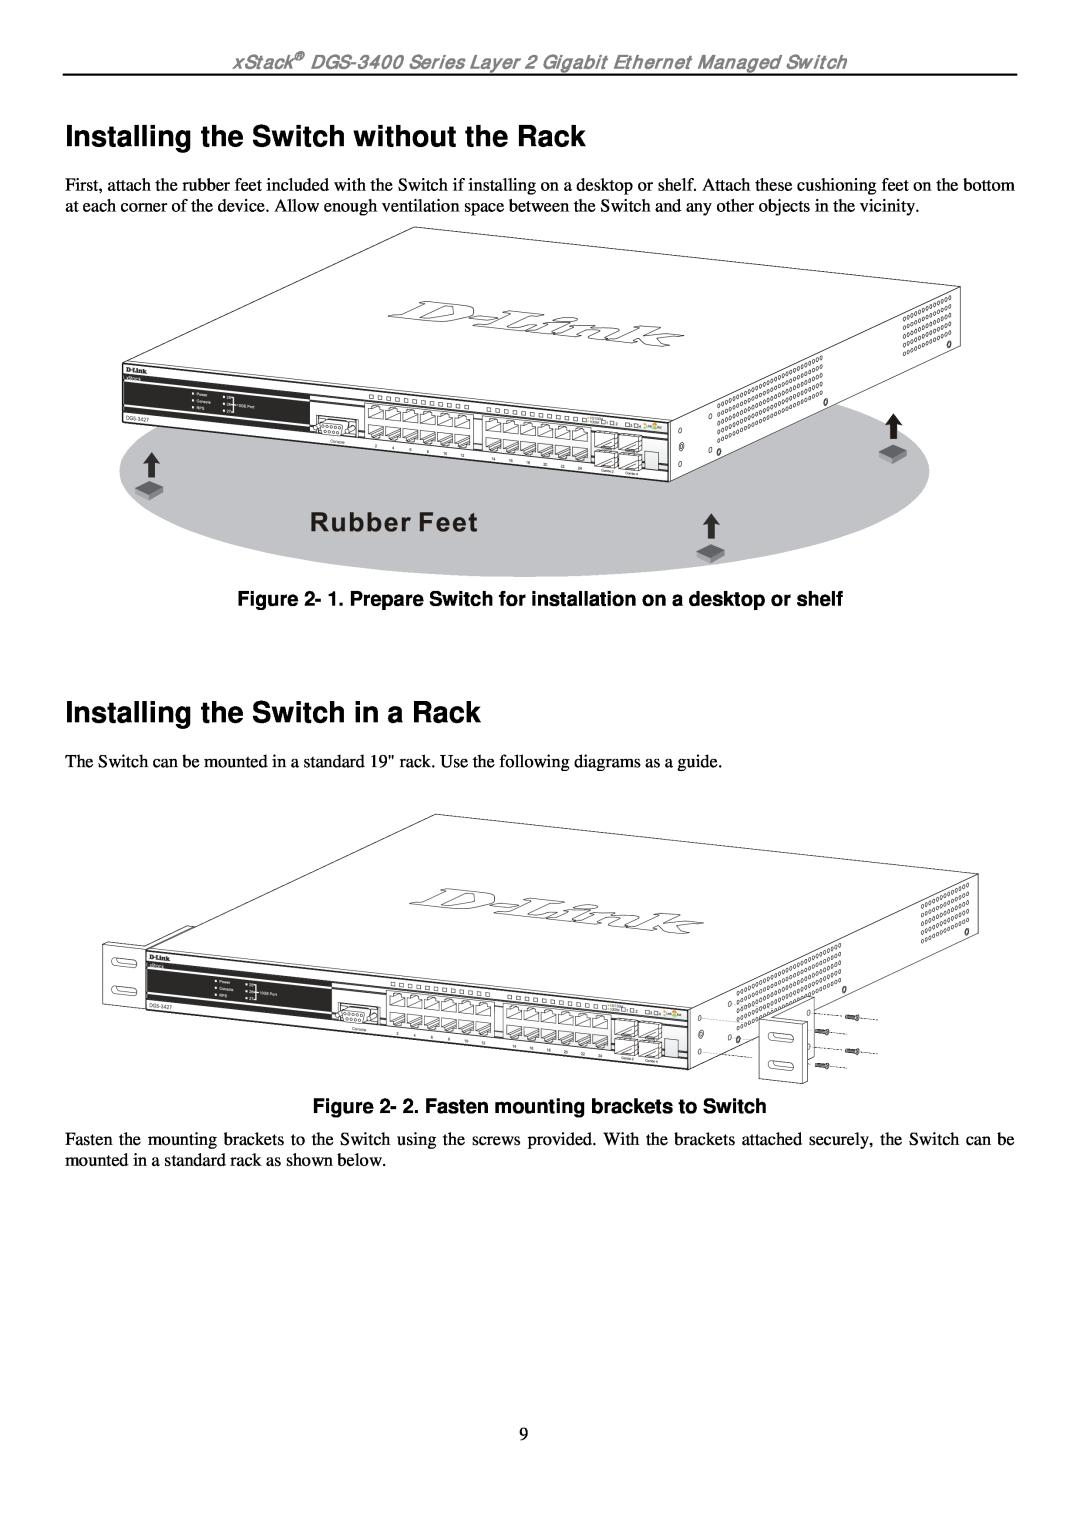 D-Link ethernet managed switch manual Installing the Switch without the Rack, Installing the Switch in a Rack 